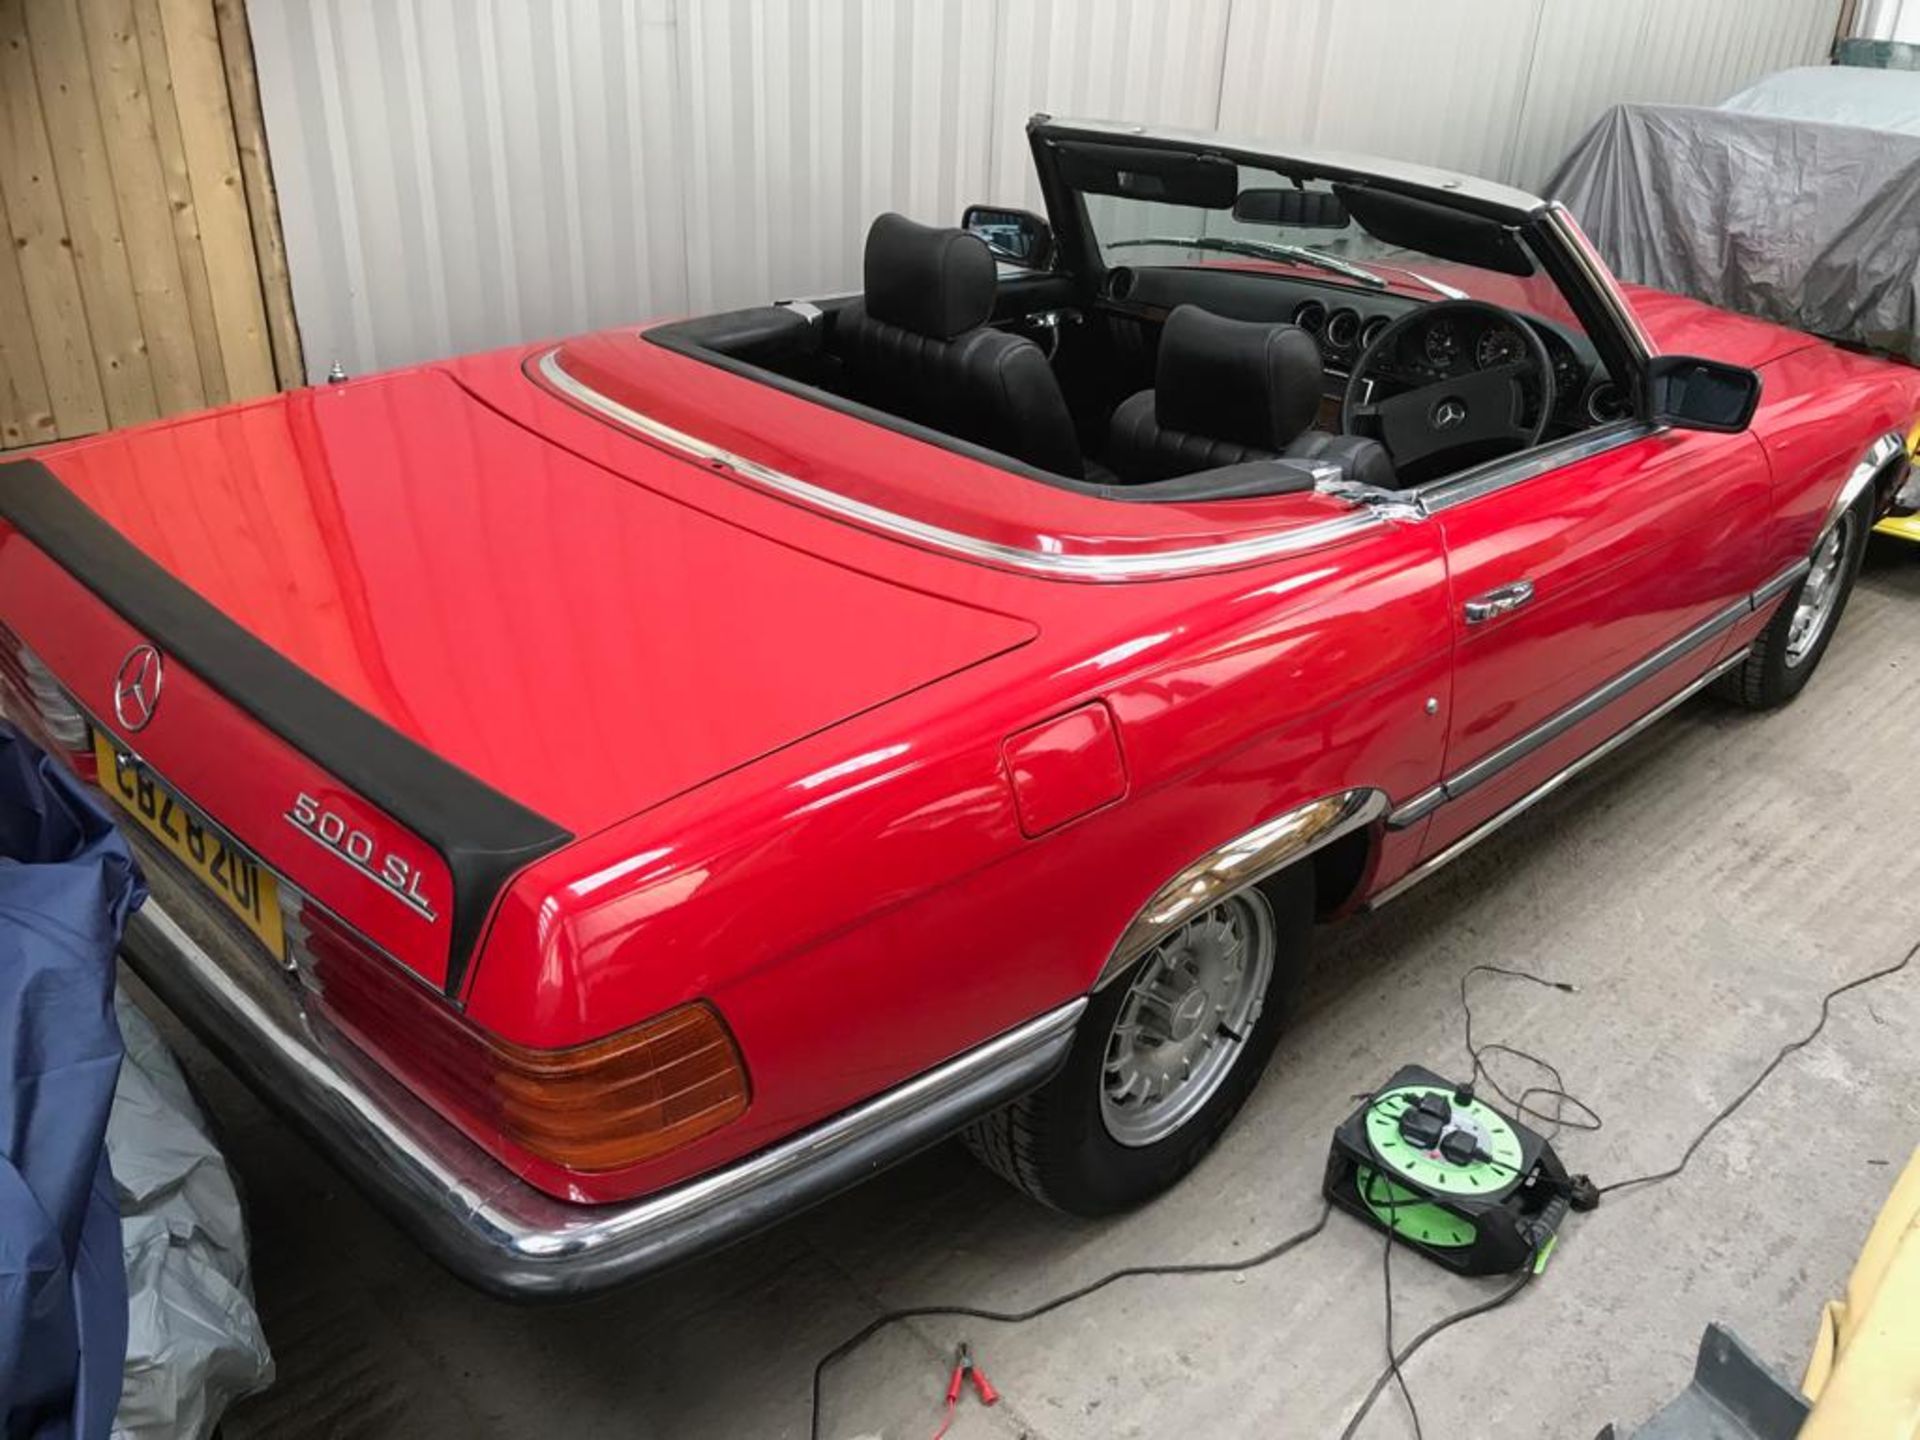 Mercedes 500SL R107 - 69,938 Miles - CL331 - Location: Manchester - No VAT on the hammer! This 500SL - Image 11 of 11